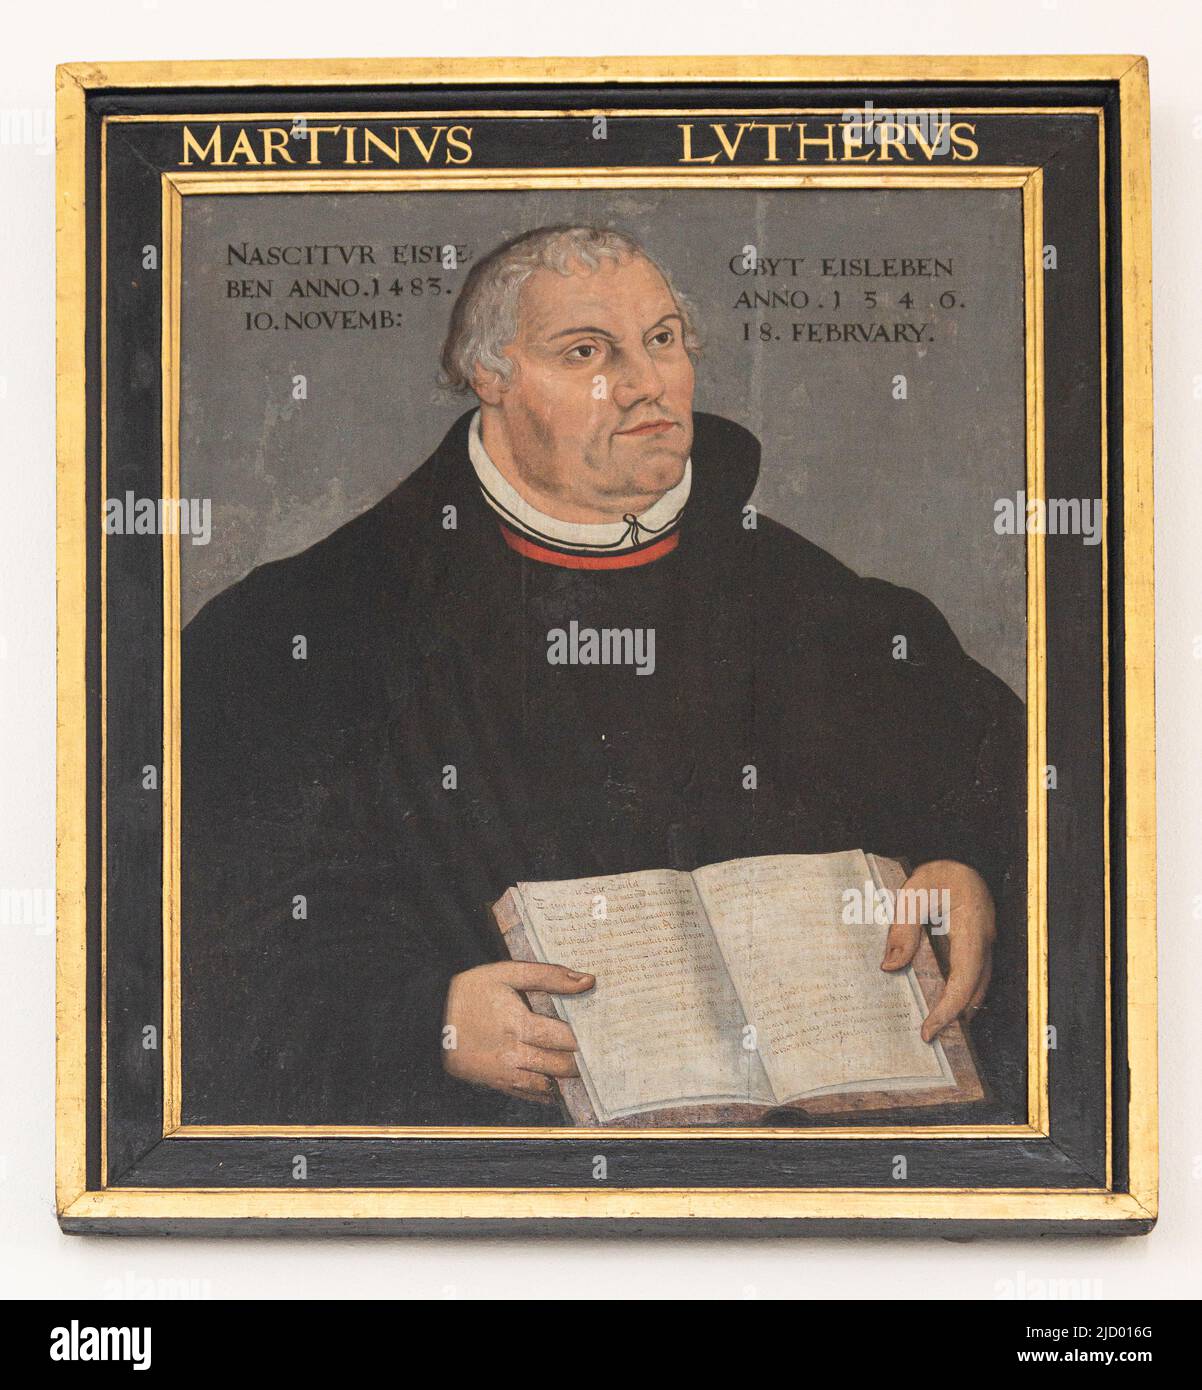 Portrait of the reformer Martin Luther from 1585 by an unknown artist. Vejle, Denmark, June 13, 2022 Stock Photo